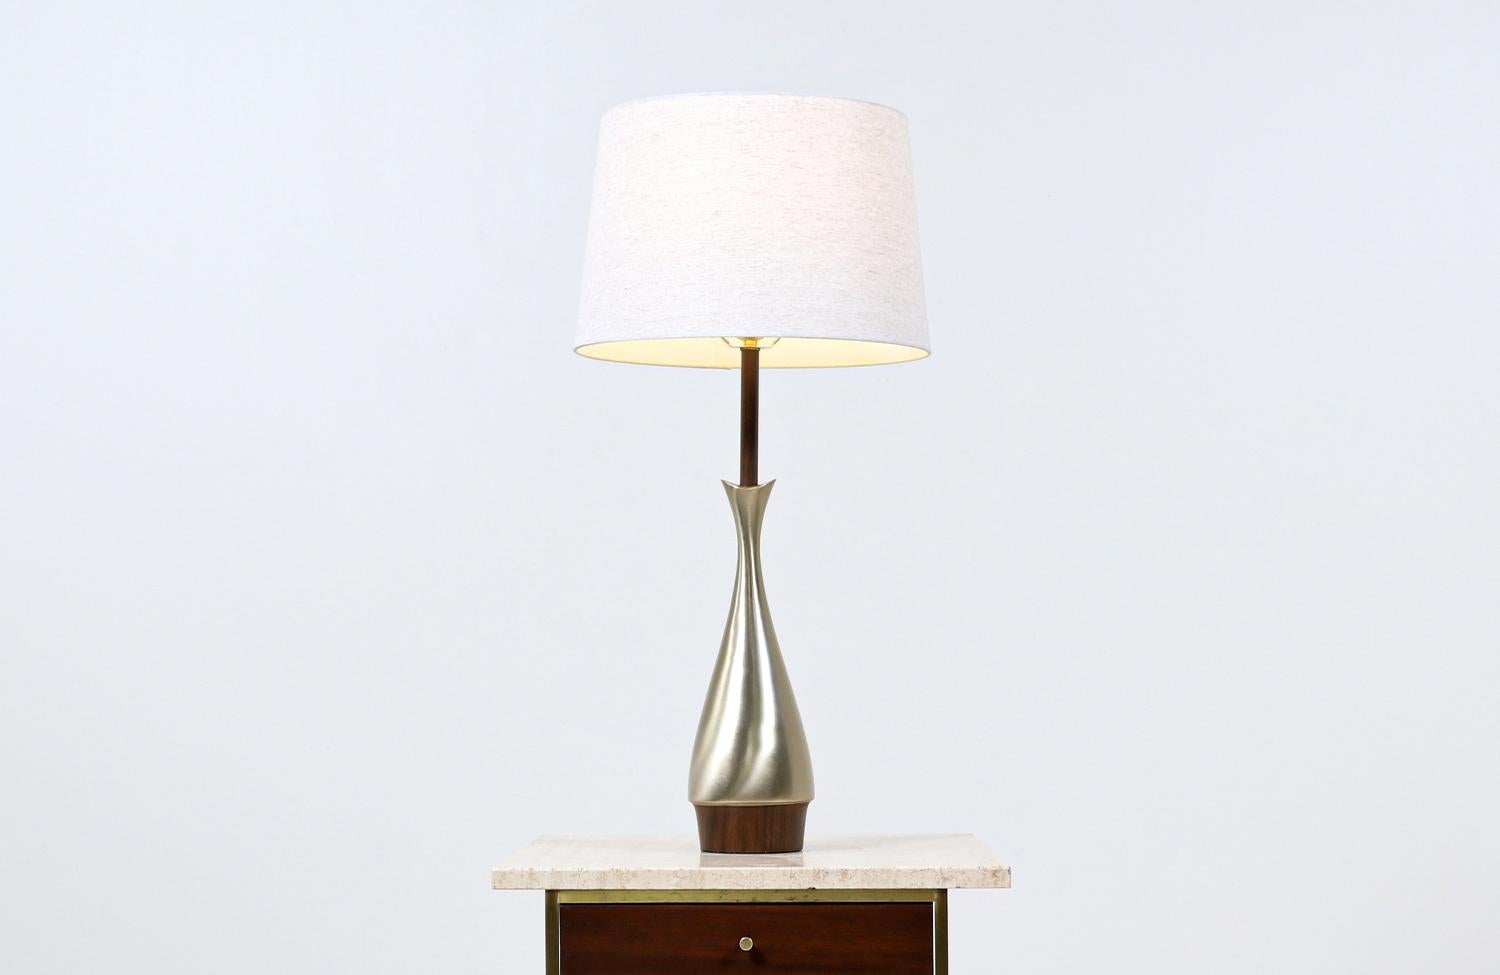 Dimensions:

31in H x 5in W x 5in D
Lamp Shade: 10in H x 13in - 15in W.

________________________________________

Transforming a piece of Mid-Century Modern furniture is like bringing history back to life, and we take this journey with passion and